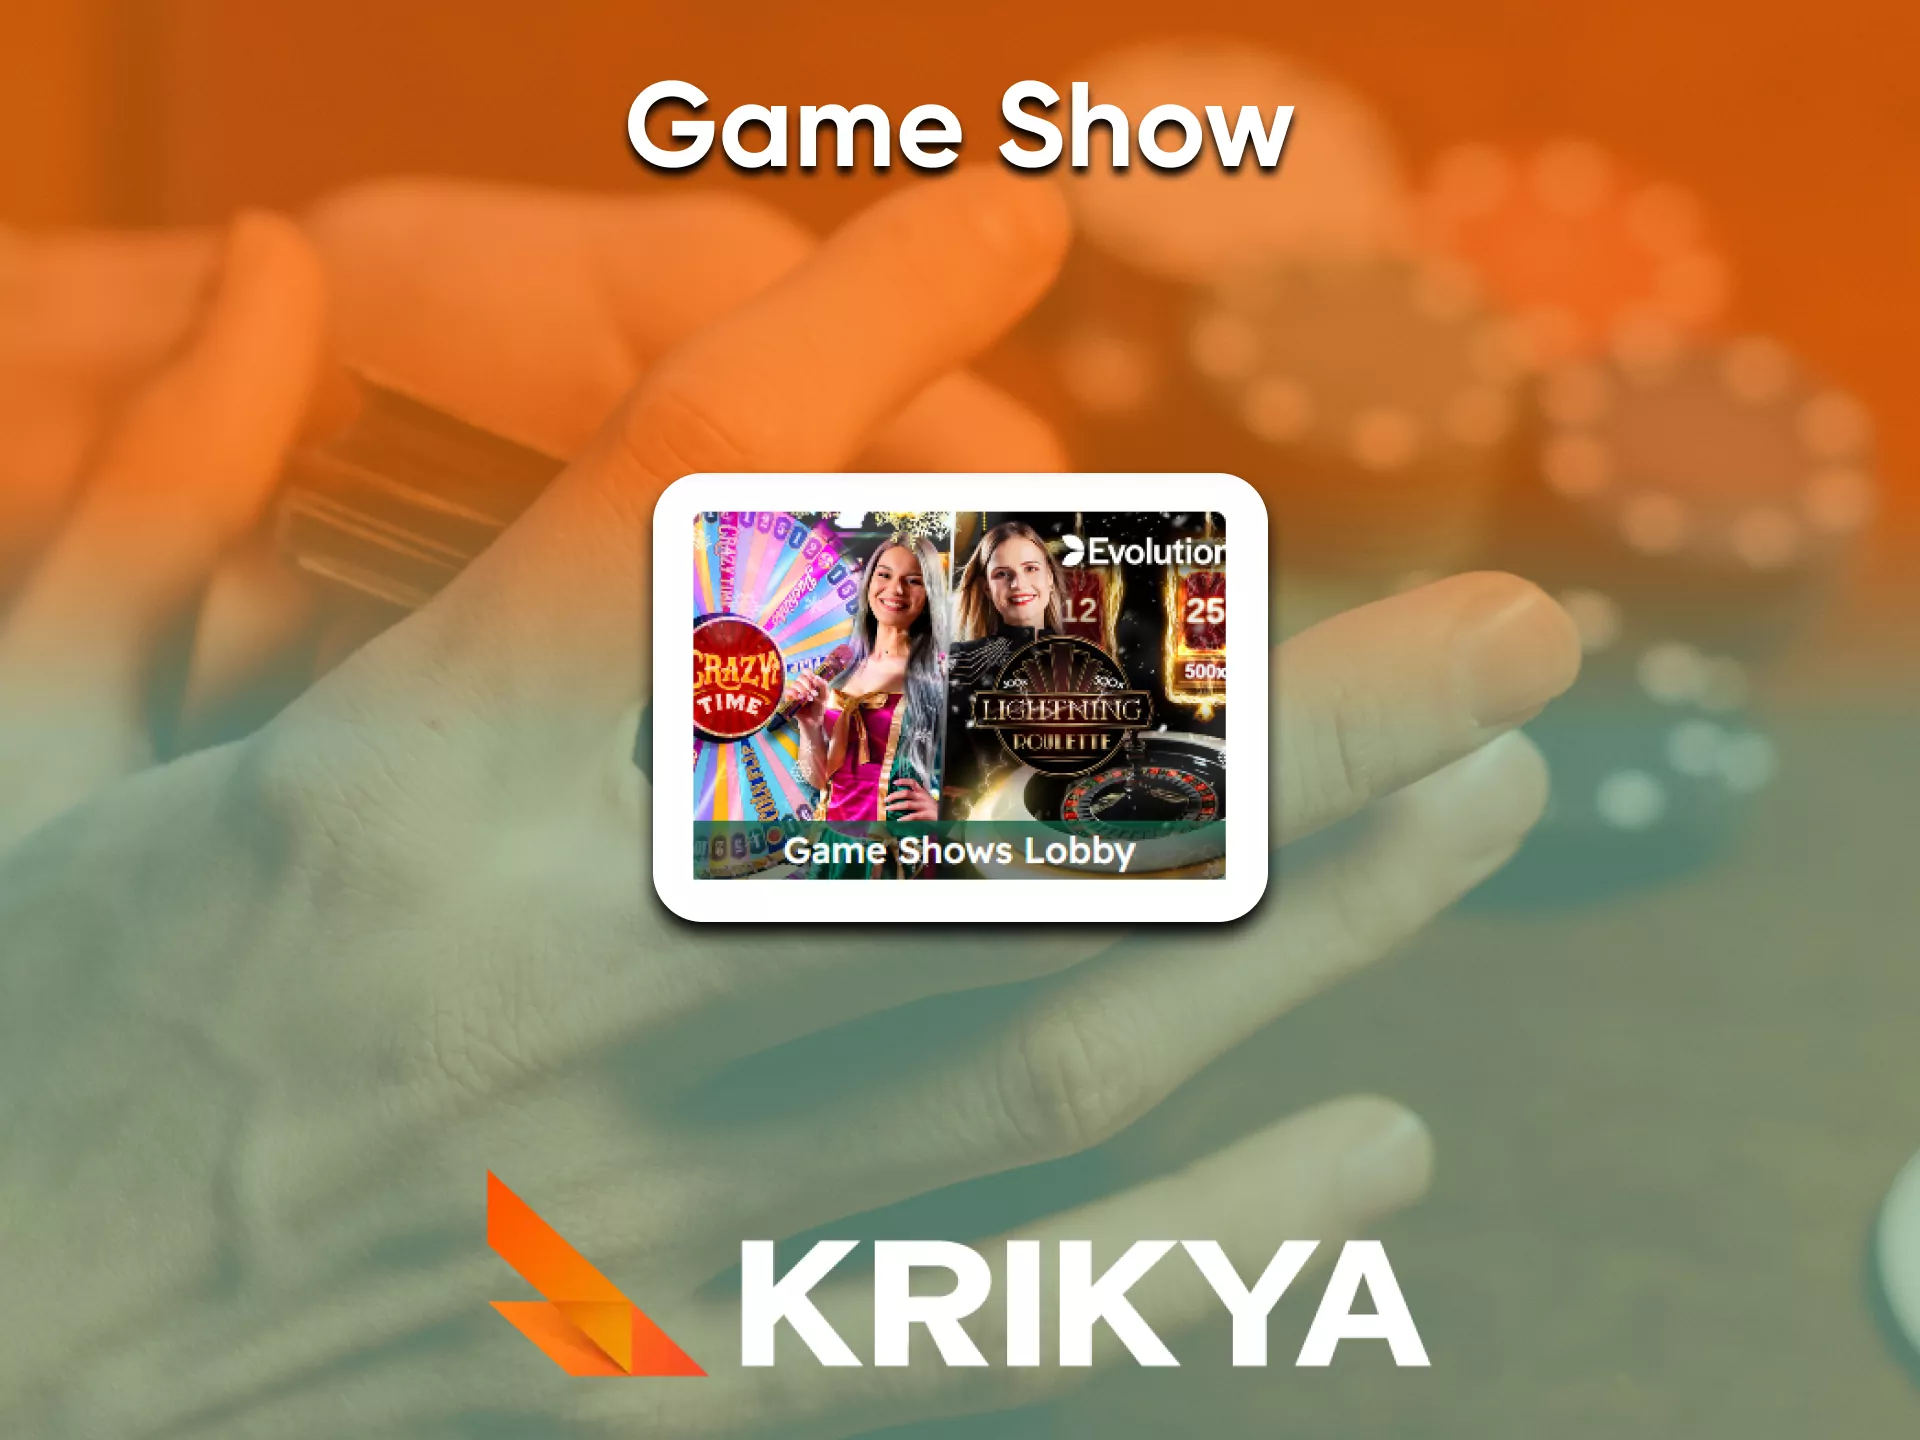 Game Show lovers can play at Krikya Casino.